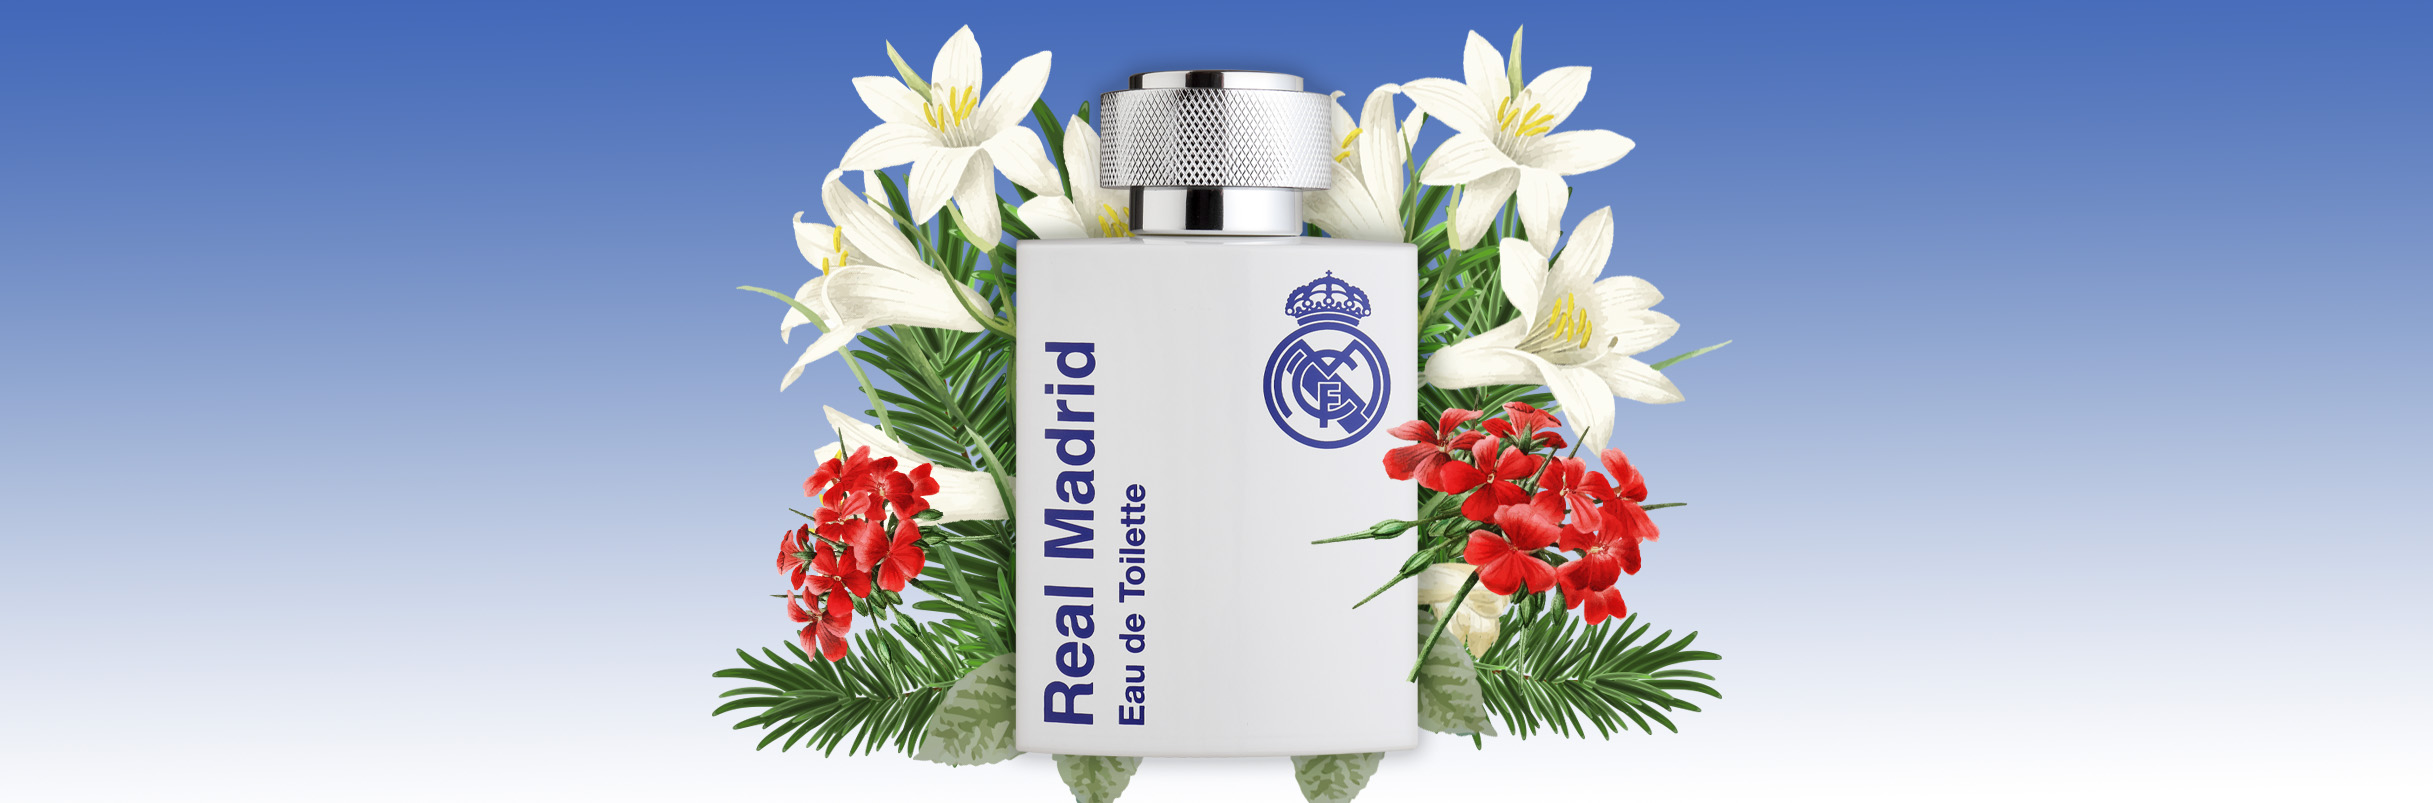 The Real Madrid fragrances